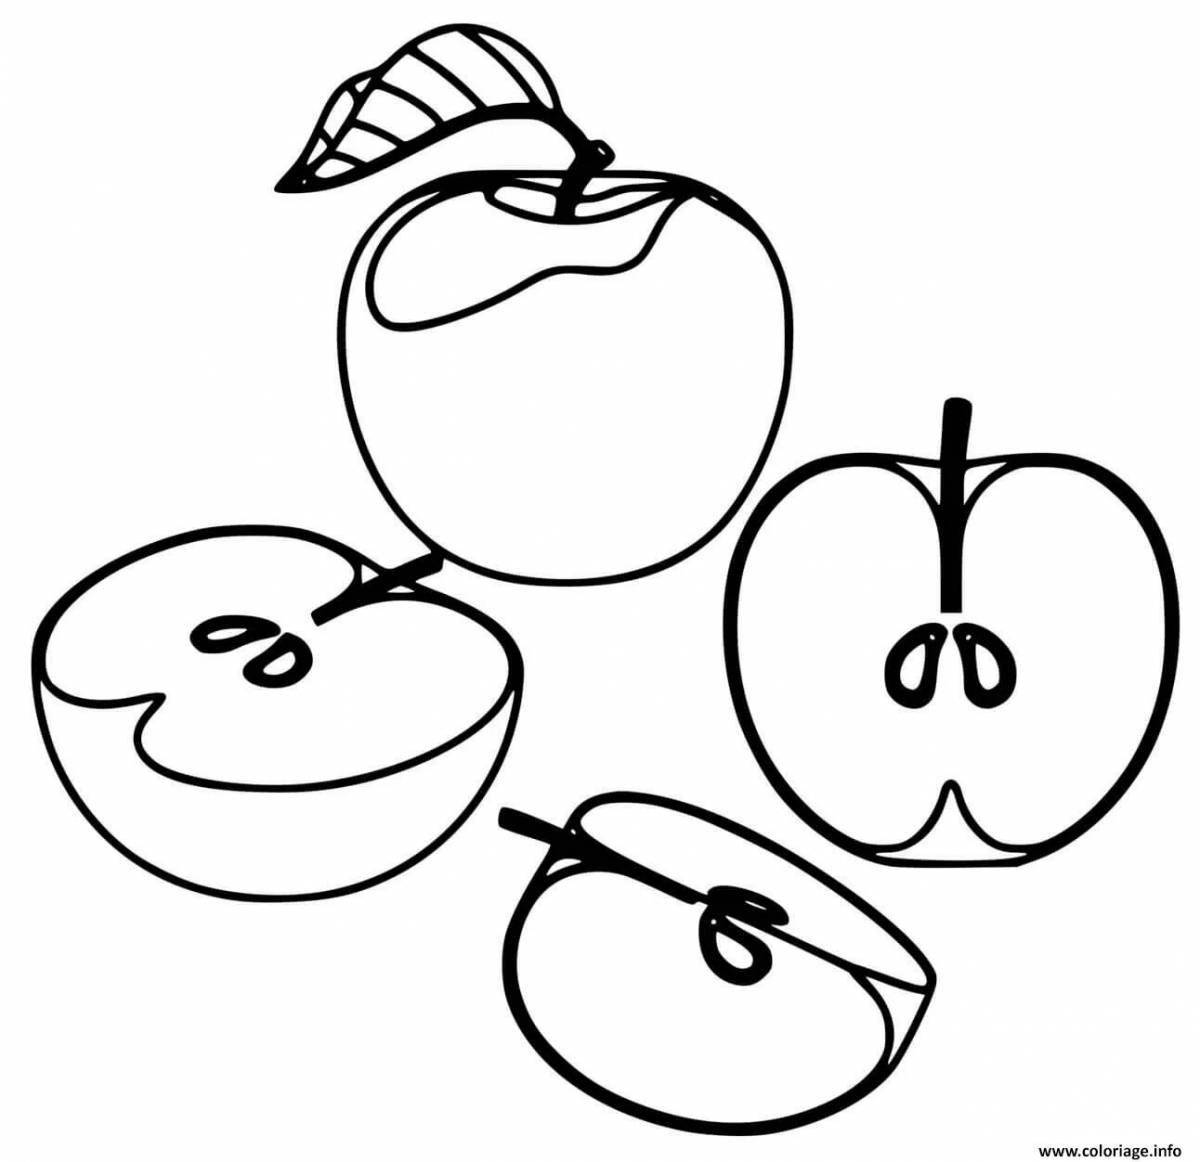 Coloring book apple for children 4-5 years old